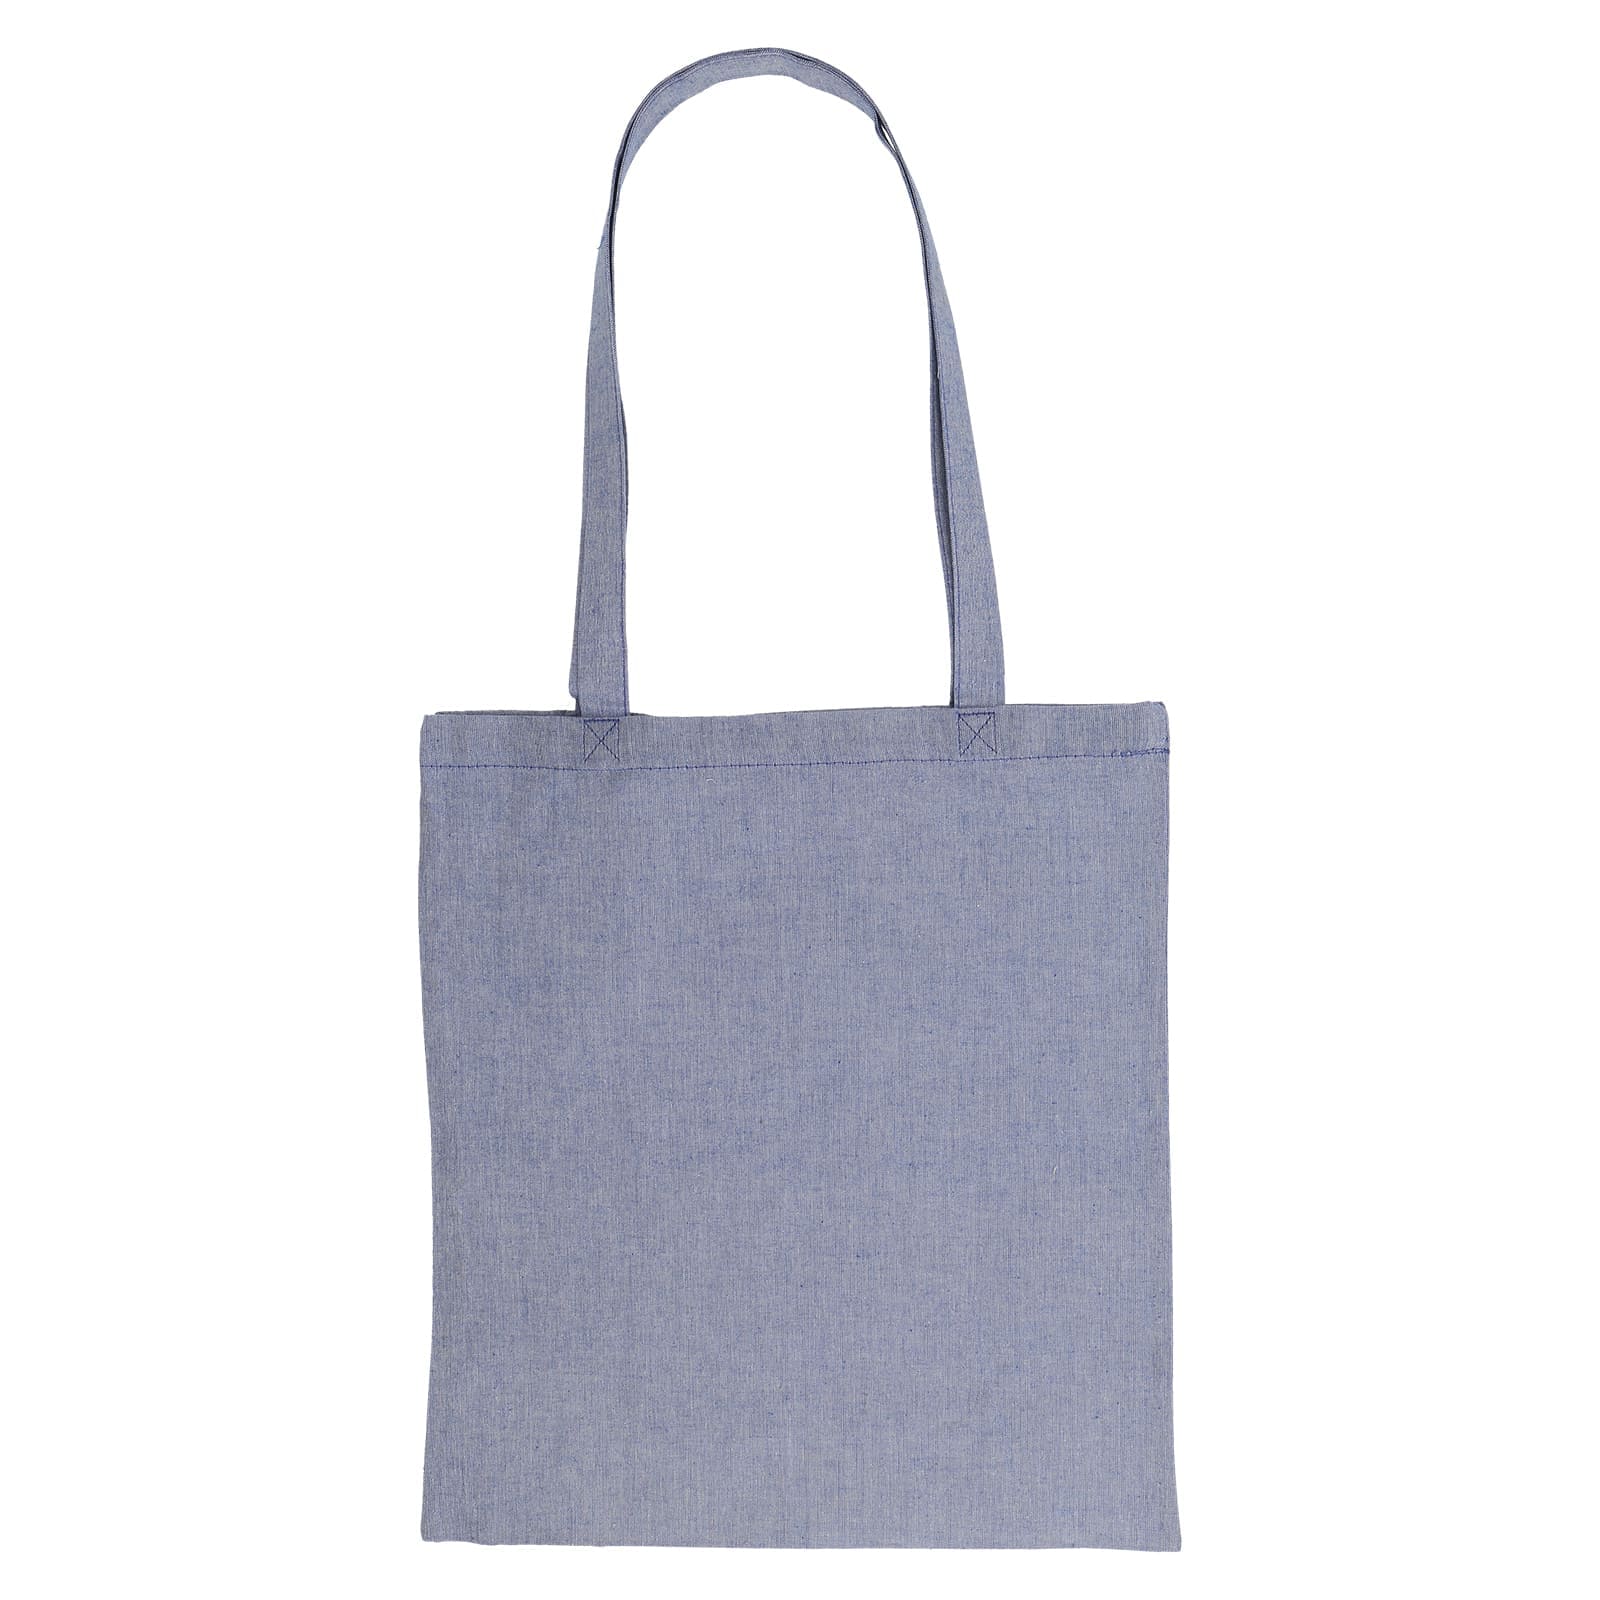 Blue recycled cotton bag